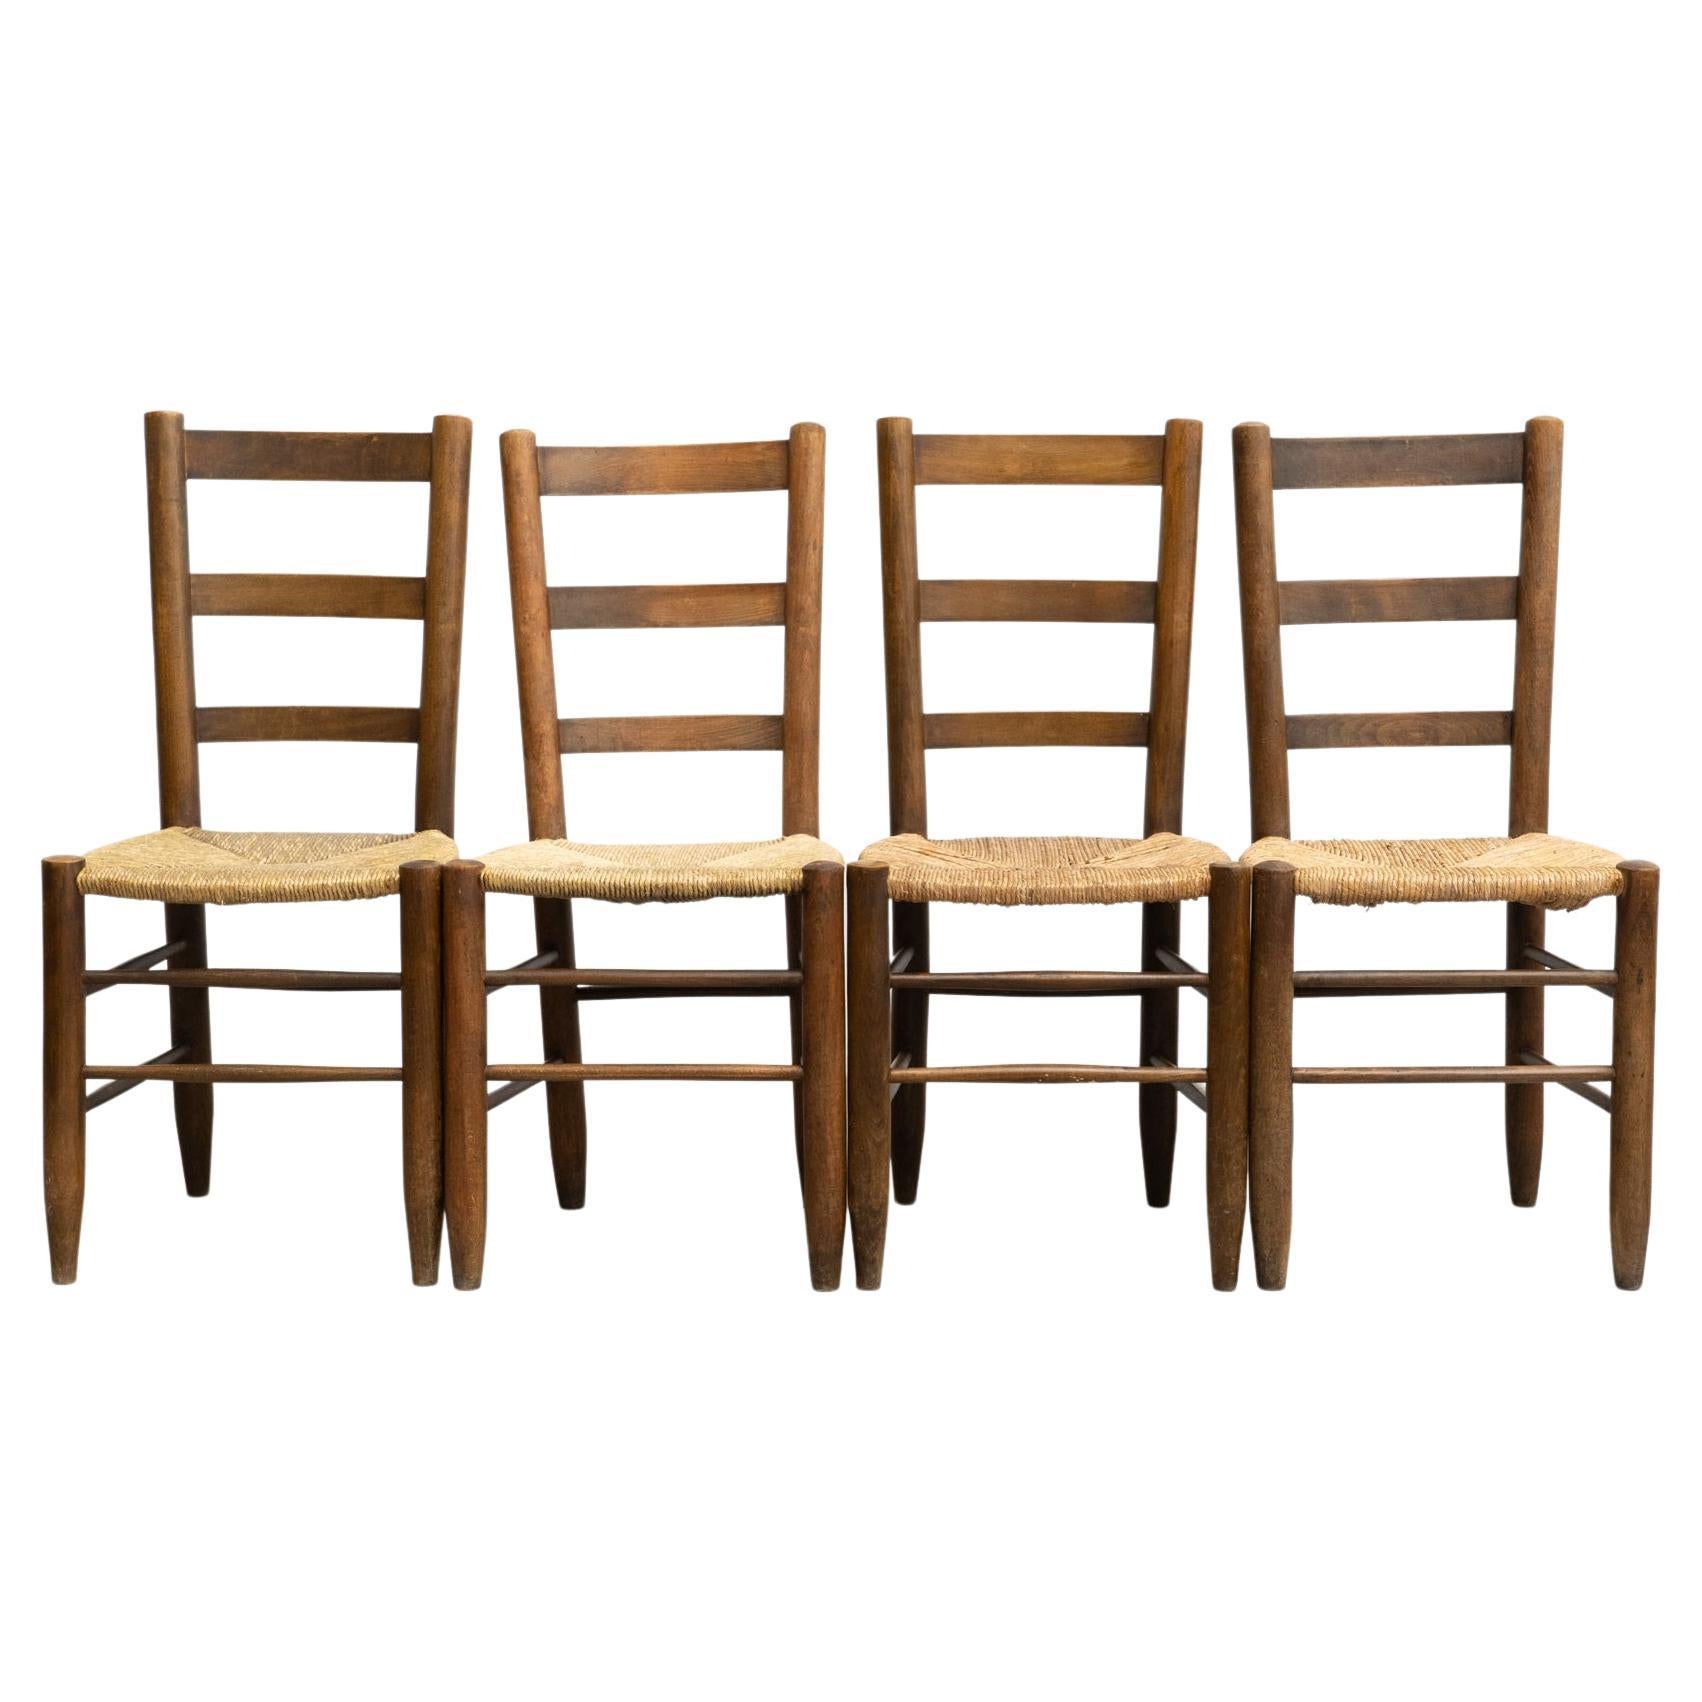 Early 20th Century Set of Four Rattan and Wood Chairs For Sale